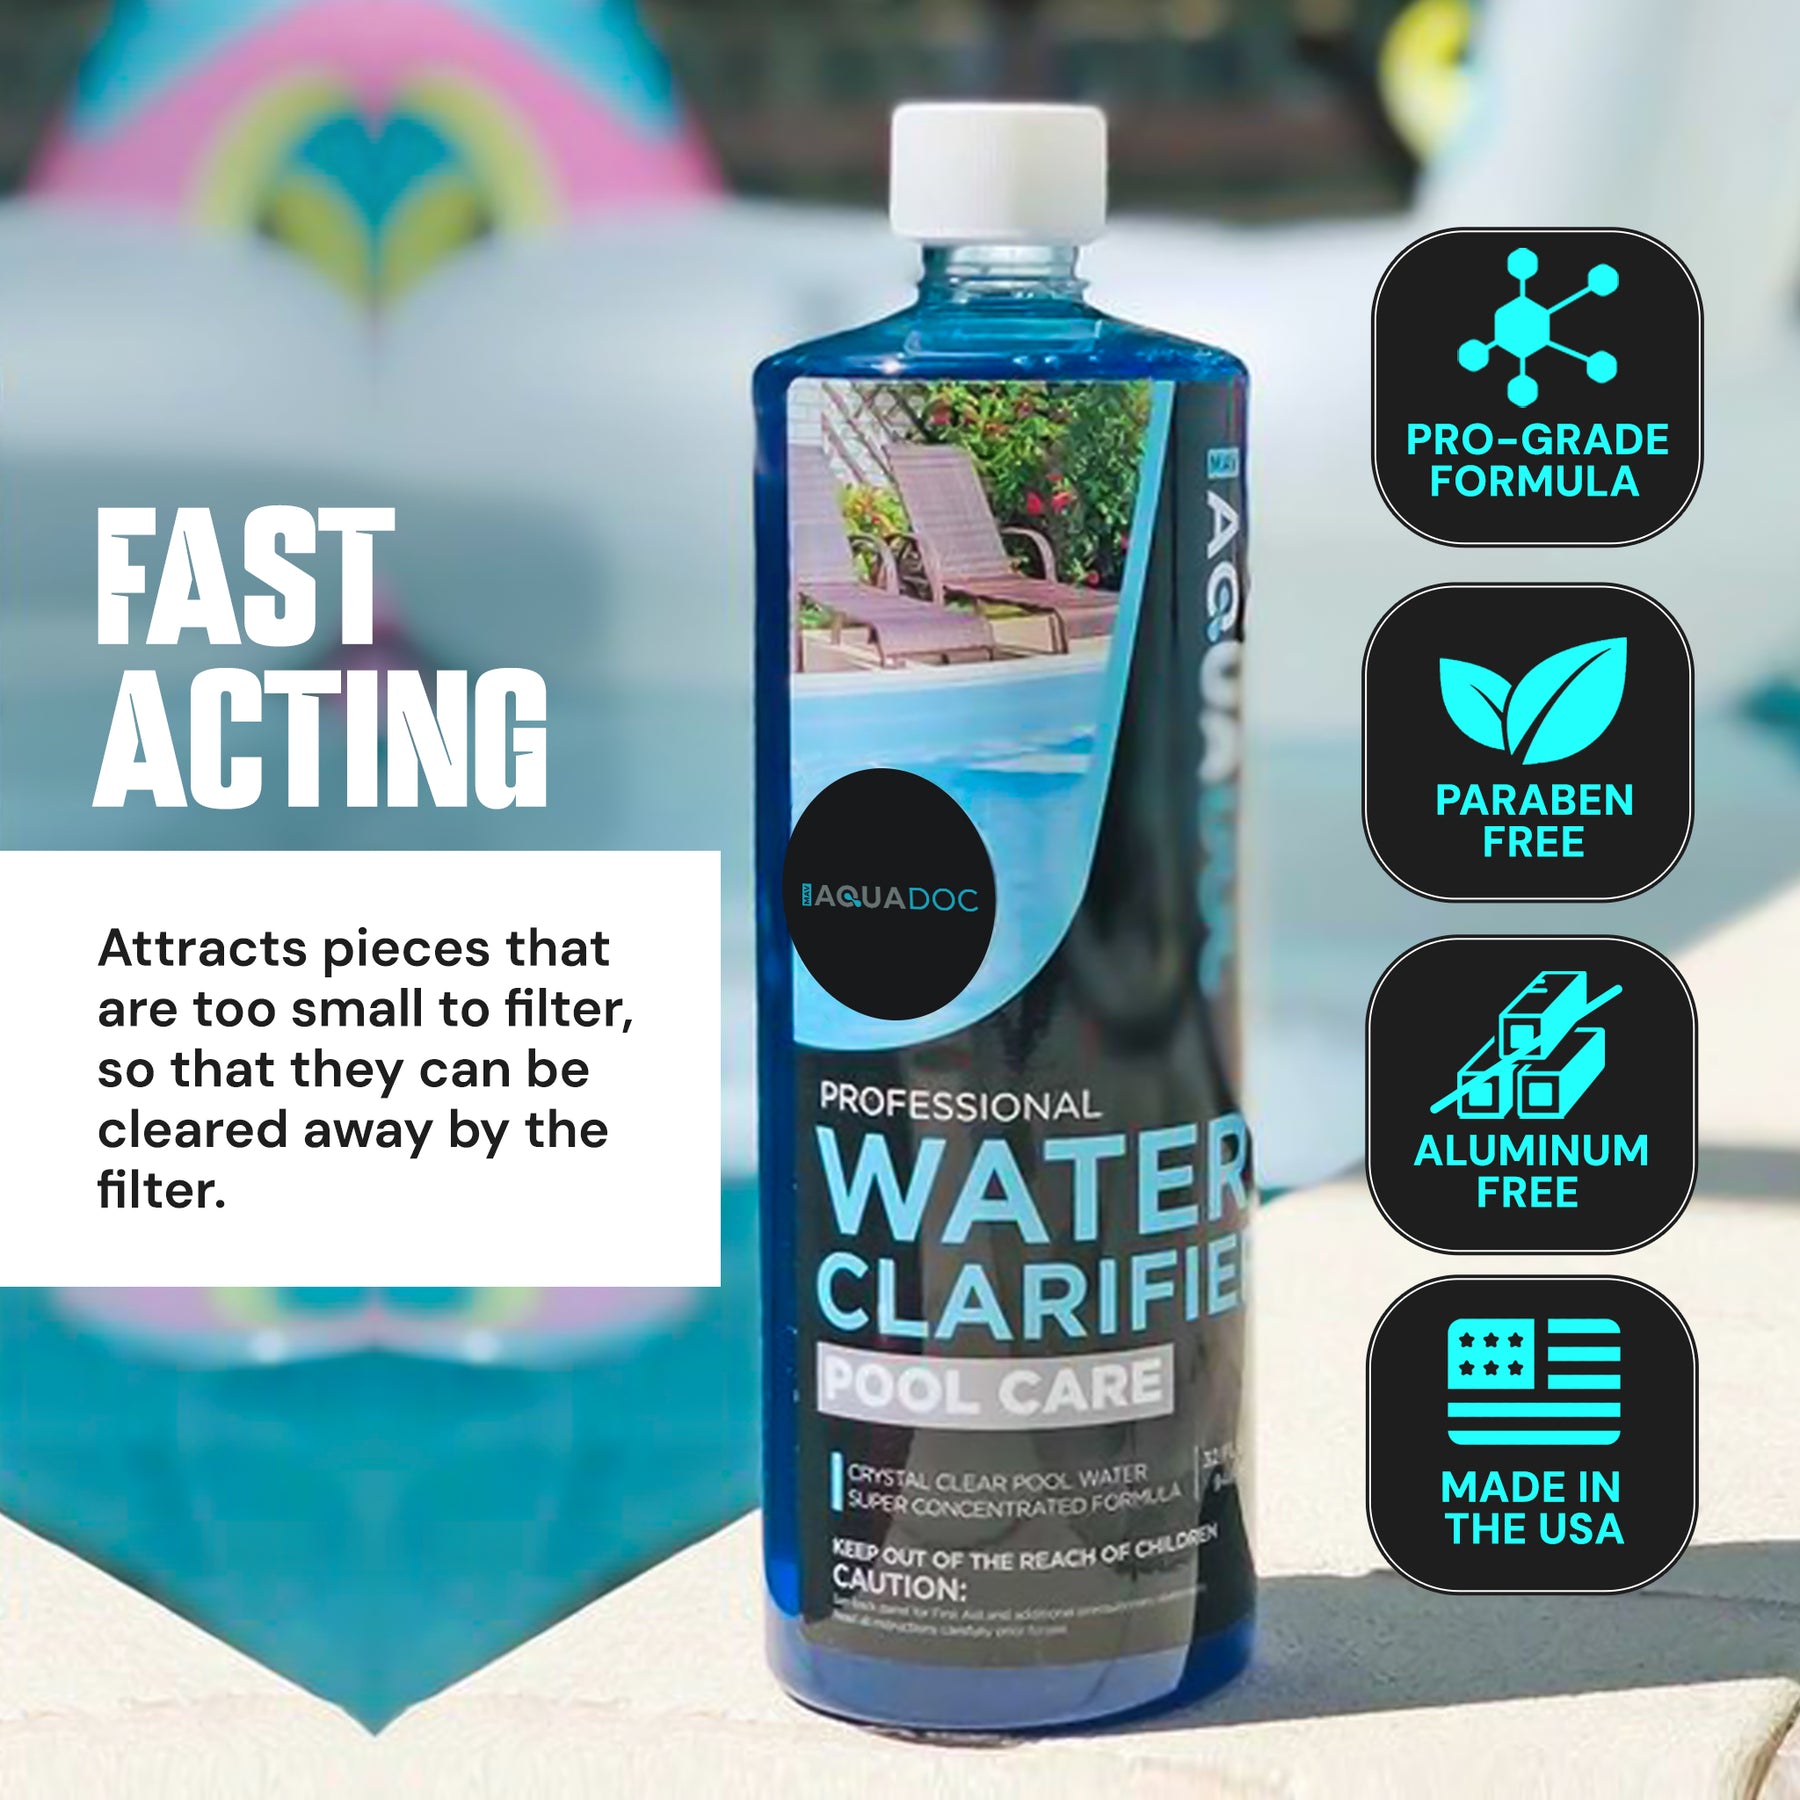 Pool water clarifier - Maintain sparkling clean water in your pool with the right clarifying solution